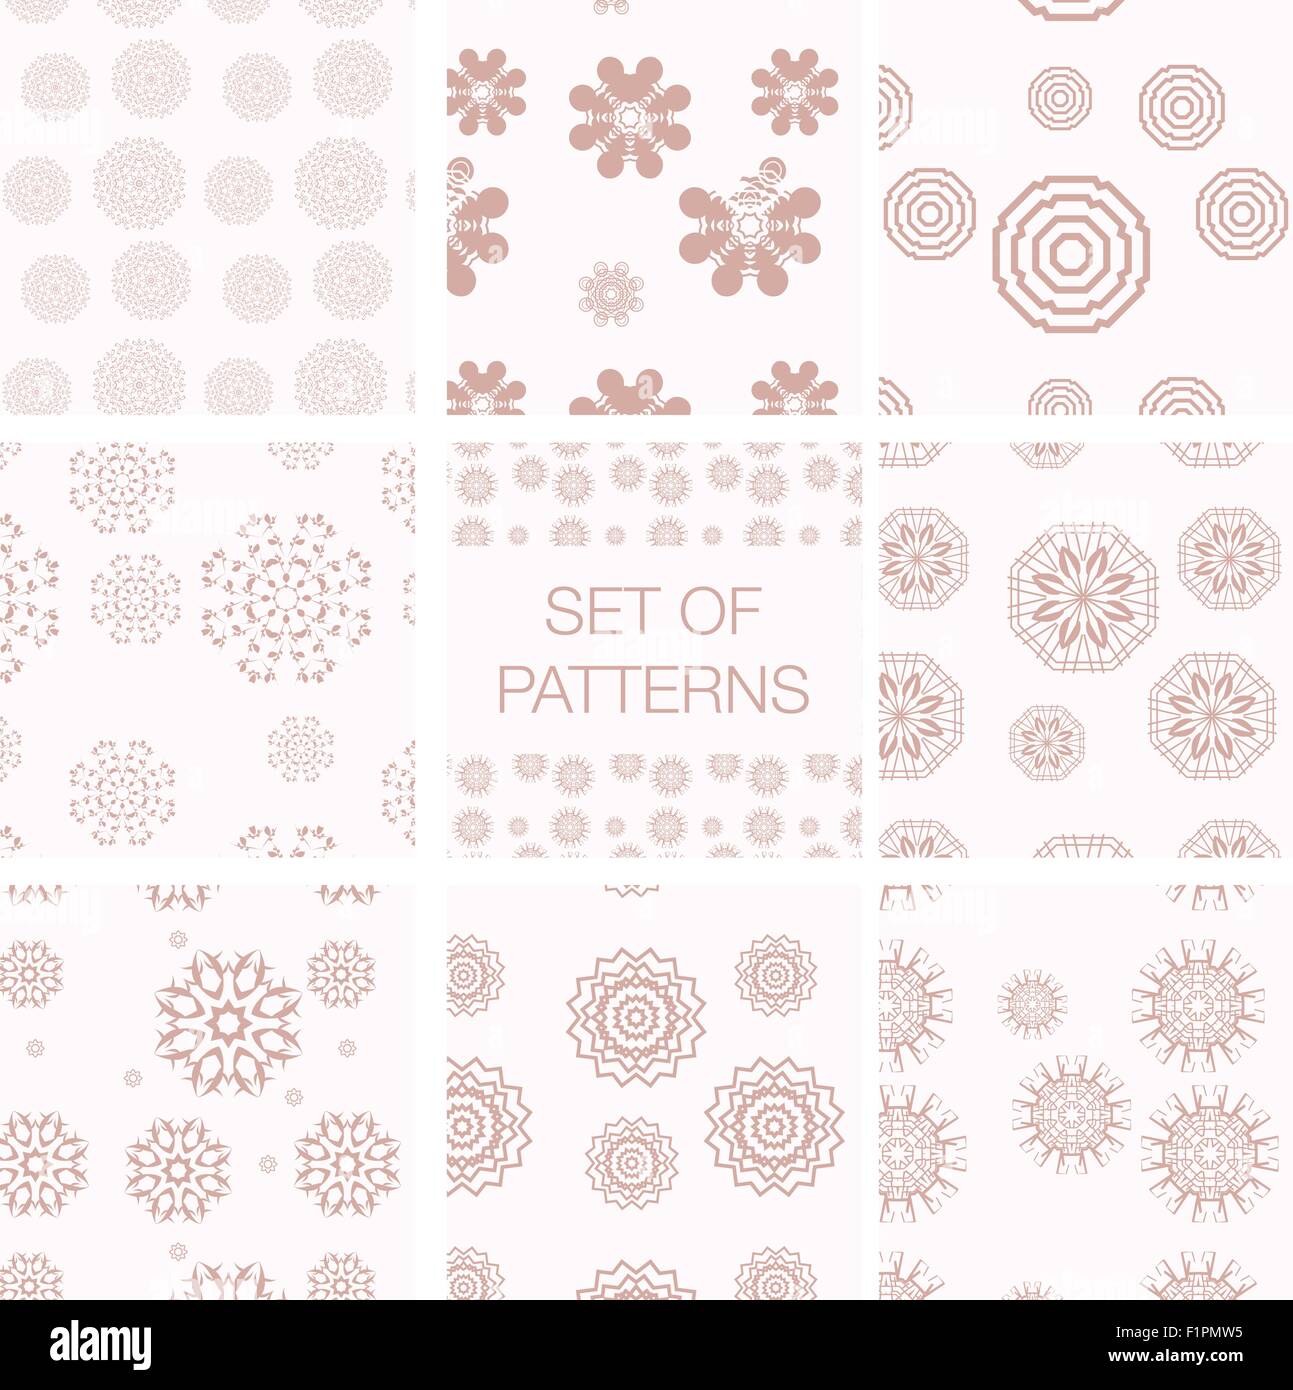 Set of vector geometrical patterns. Vintage textures. Decorative background for cards, invitations, web design. Retro digital pa Stock Vector